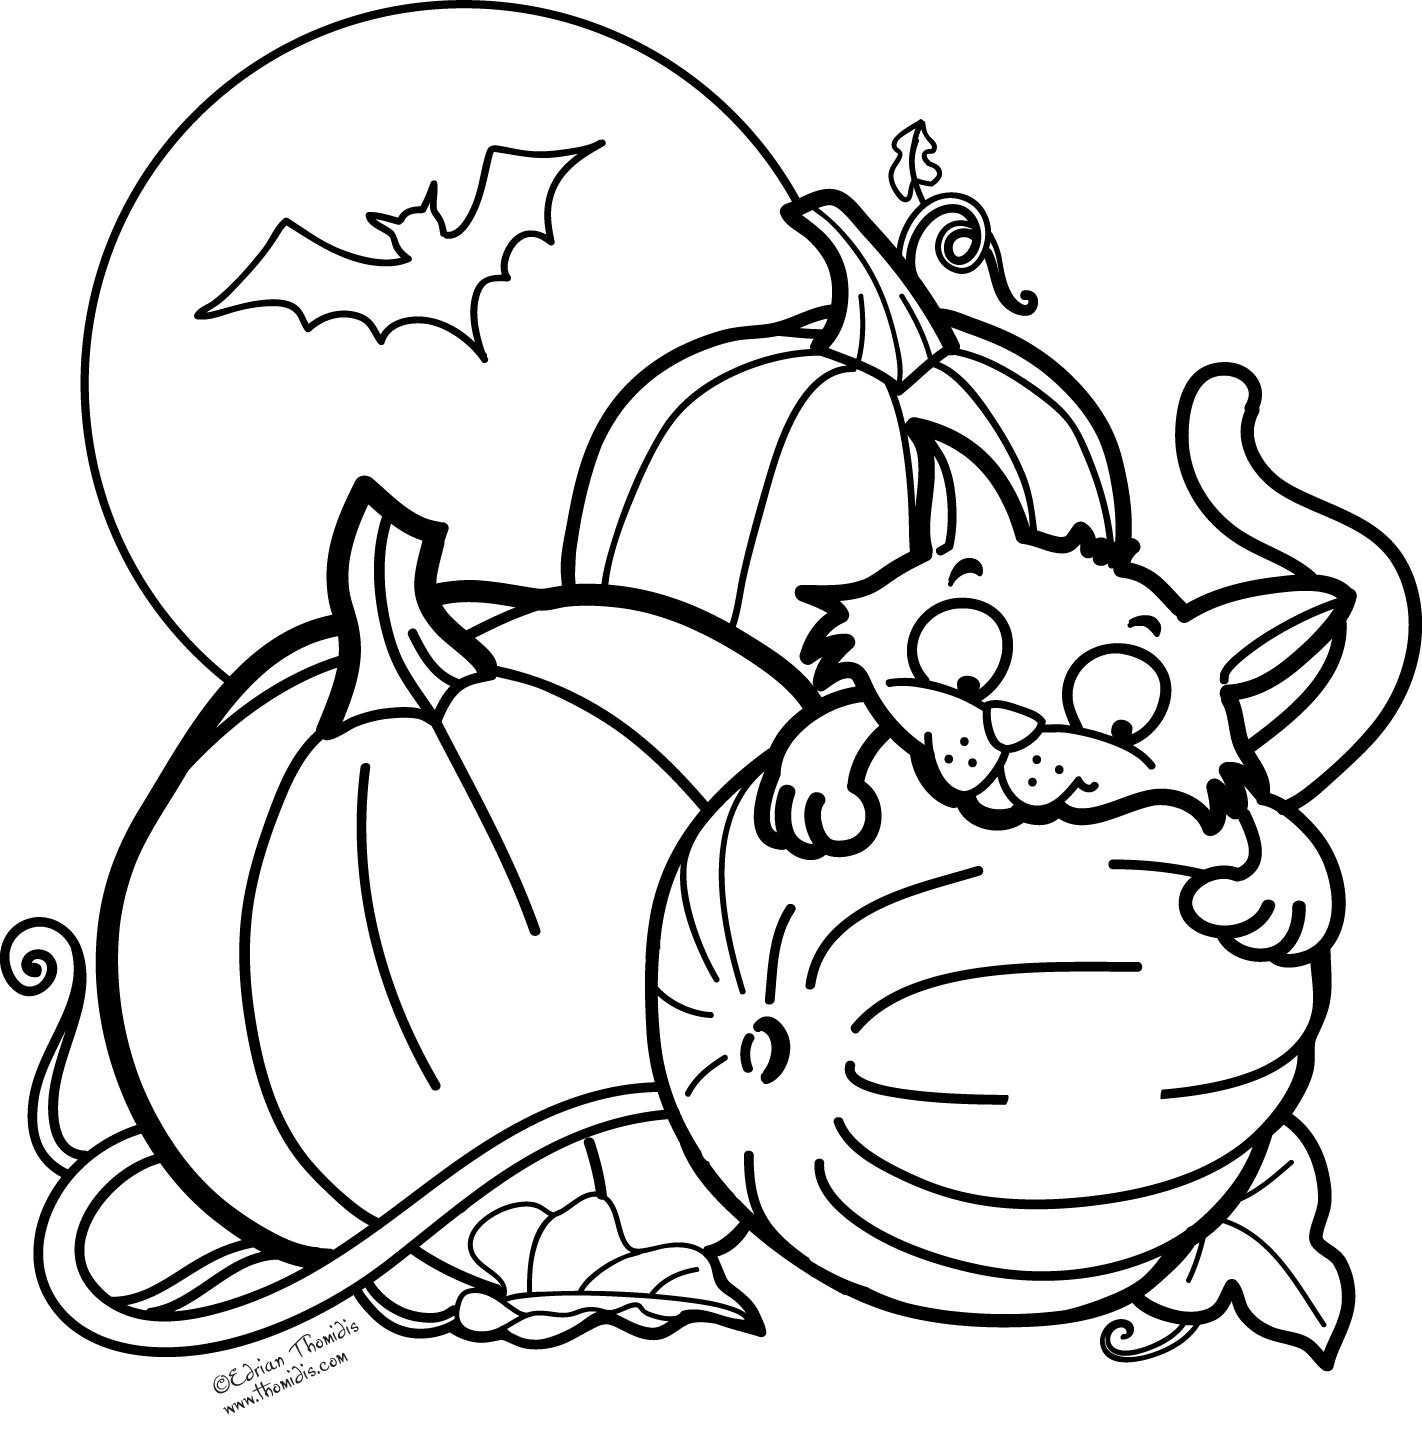 21 Of the Best Ideas for Halloween Kids Coloring Pages – Home, Family ...